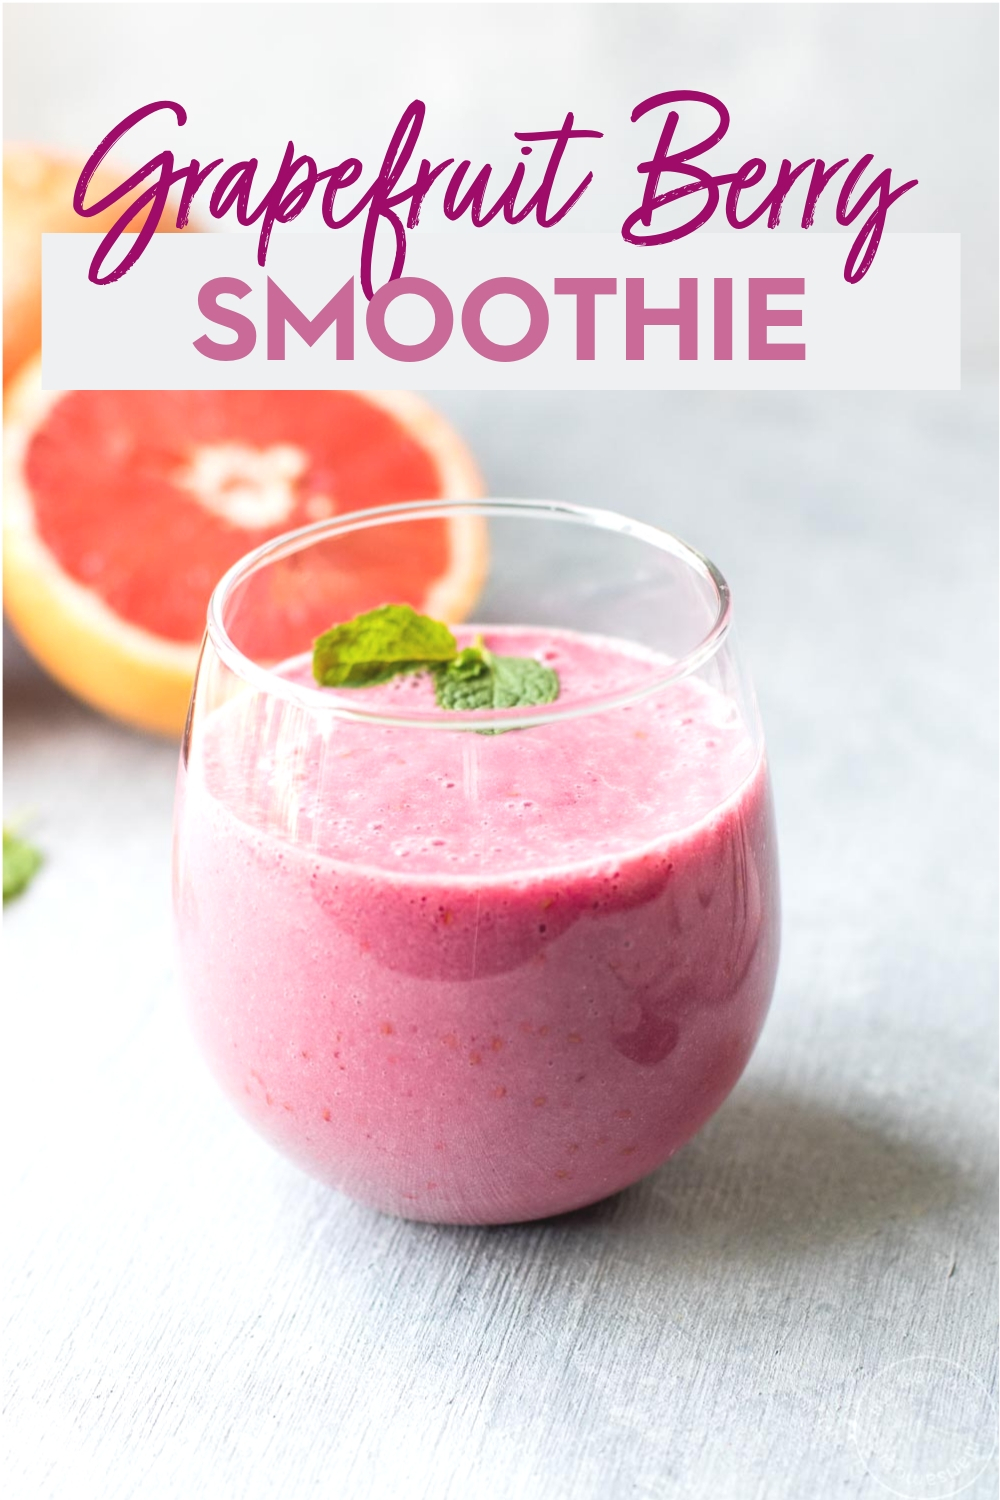 grapefruit berry smoothie in glass with text